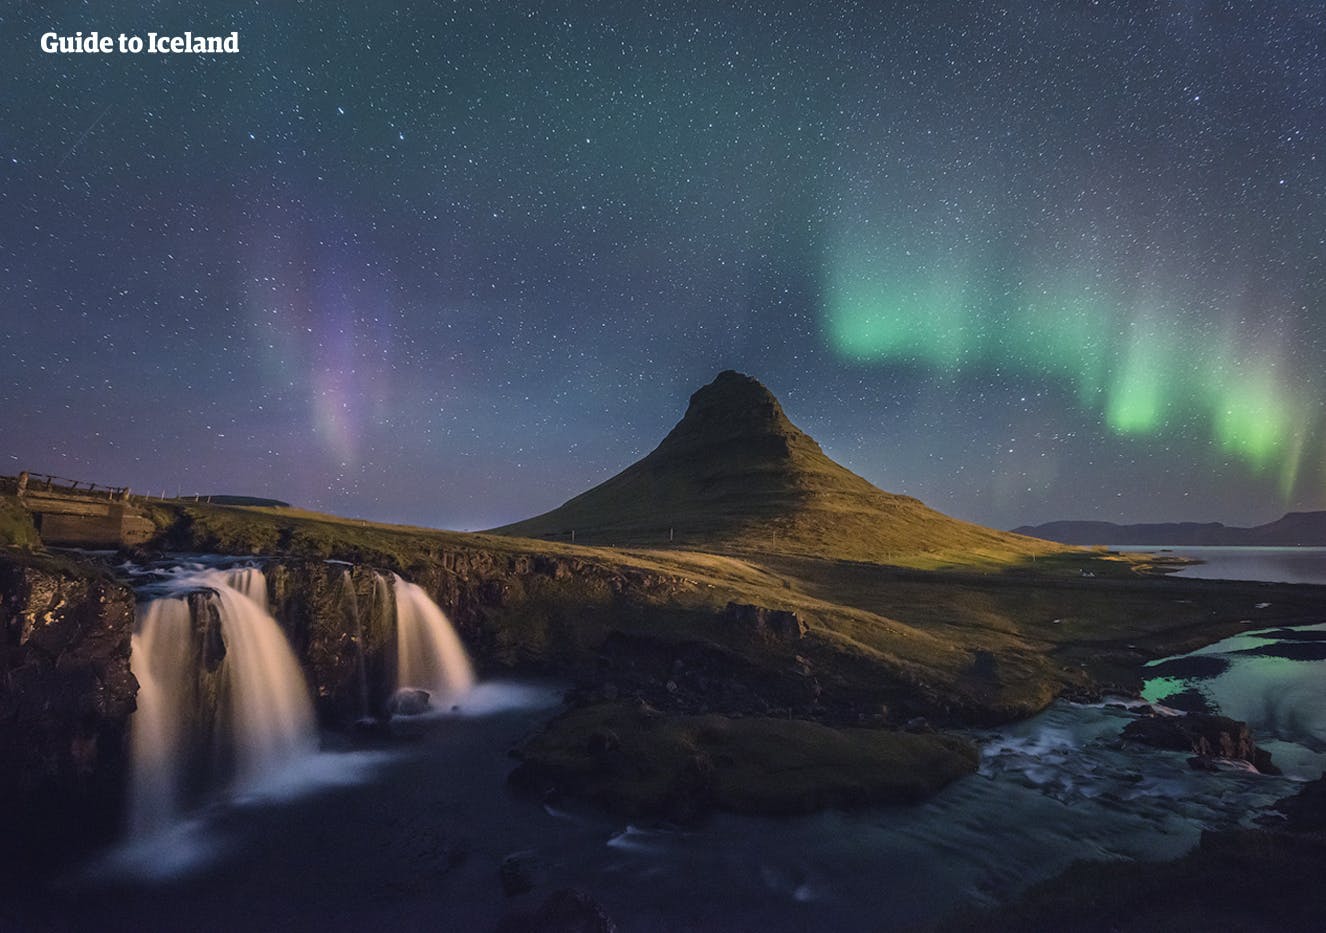 Mount Kirkjufell stands proudly in front of the stunning auroras.